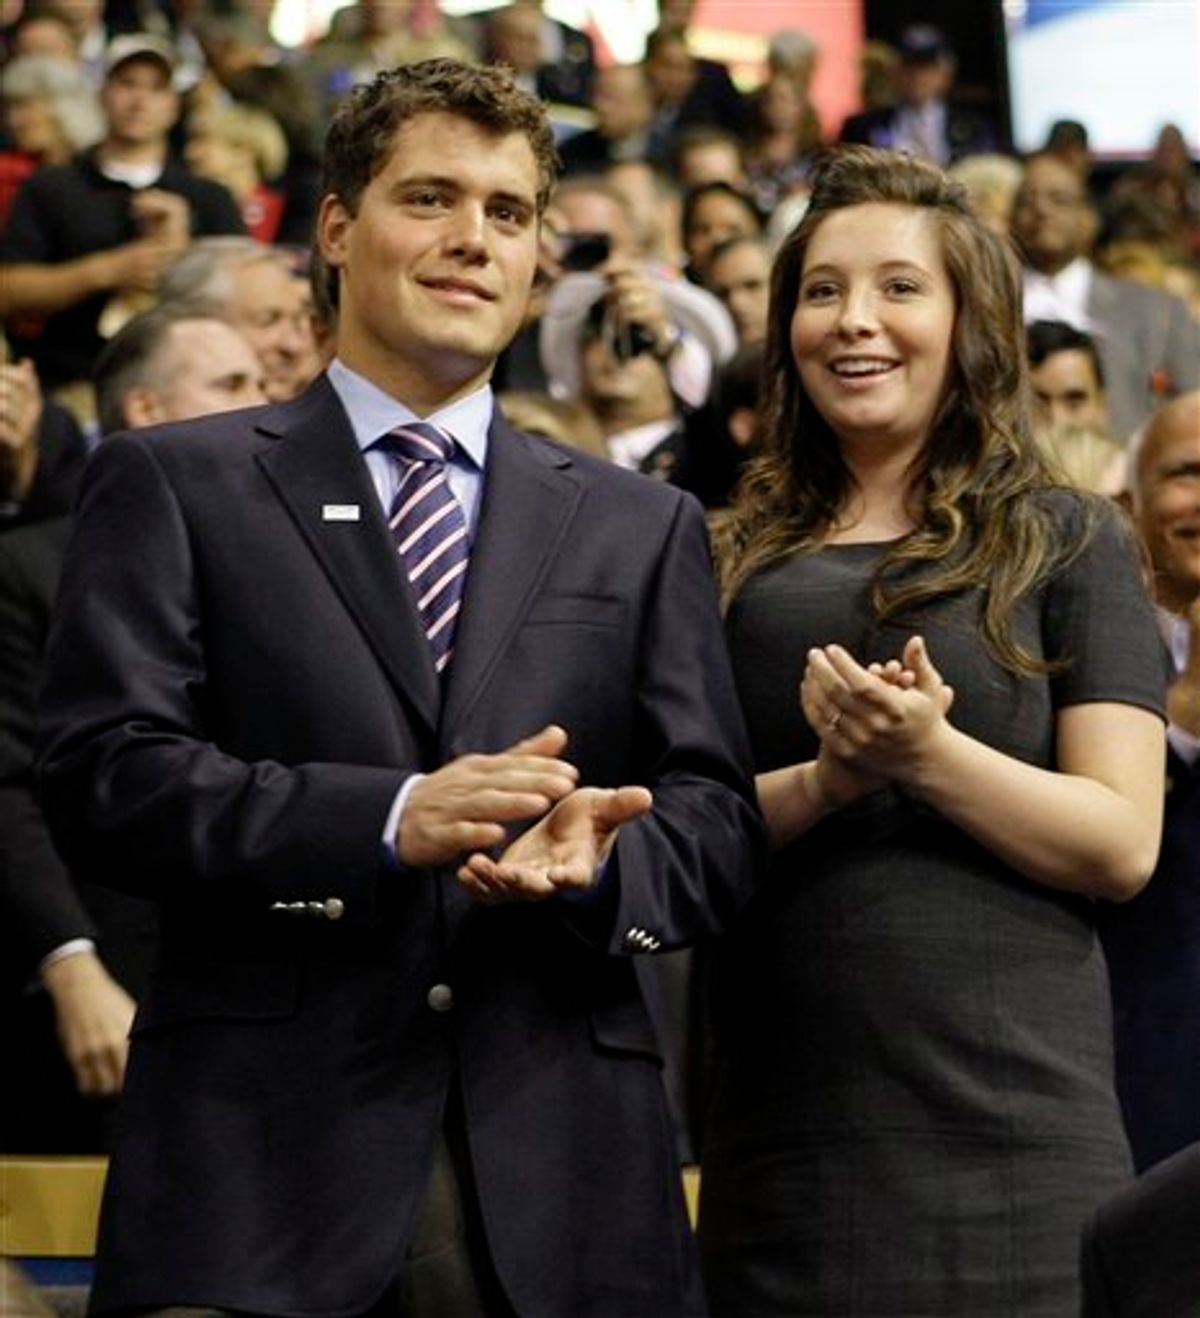 FILE - This Sept. 3, 2008 file photo shows Bristol Palin, daughter of Alaska Gov. Sarah Palin and former Republican vice presidential candidate, and Levi Johnston at the Republican National Convention in St. Paul, Minn. Bristol Palin tells the magazine US Weekly Wednesday July 14, 2010  that she finds the idea of telling her mother about her engagement "intimidating and scary." The pair say they reconnected while working out a custody plan and became engaged two weeks ago.  (AP Photo/Charles Rex Arbogast, file) (Associated Press)